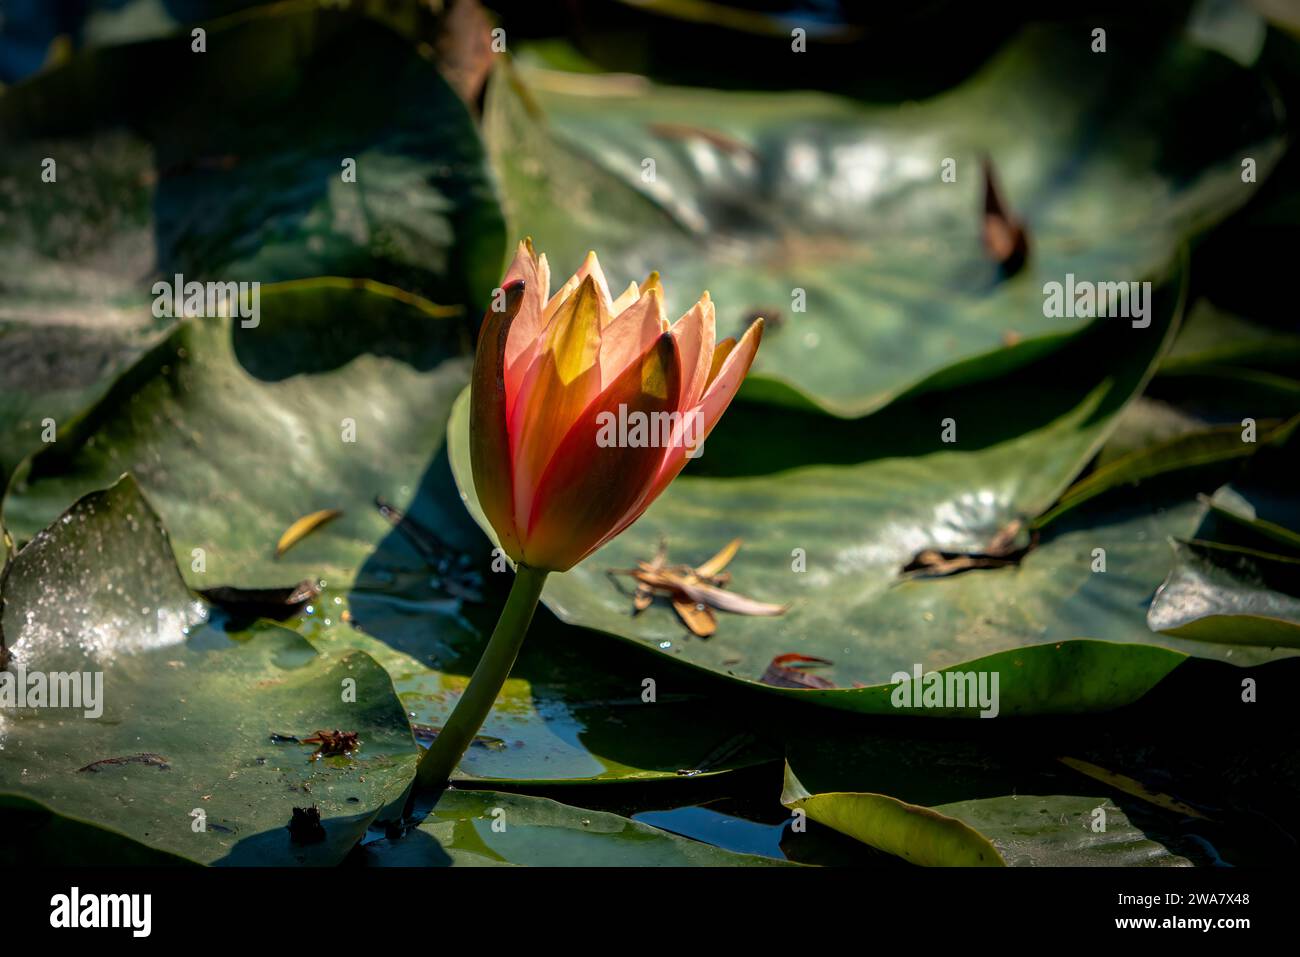 Lotus flowers and leaves floating on water in. Stock Photo